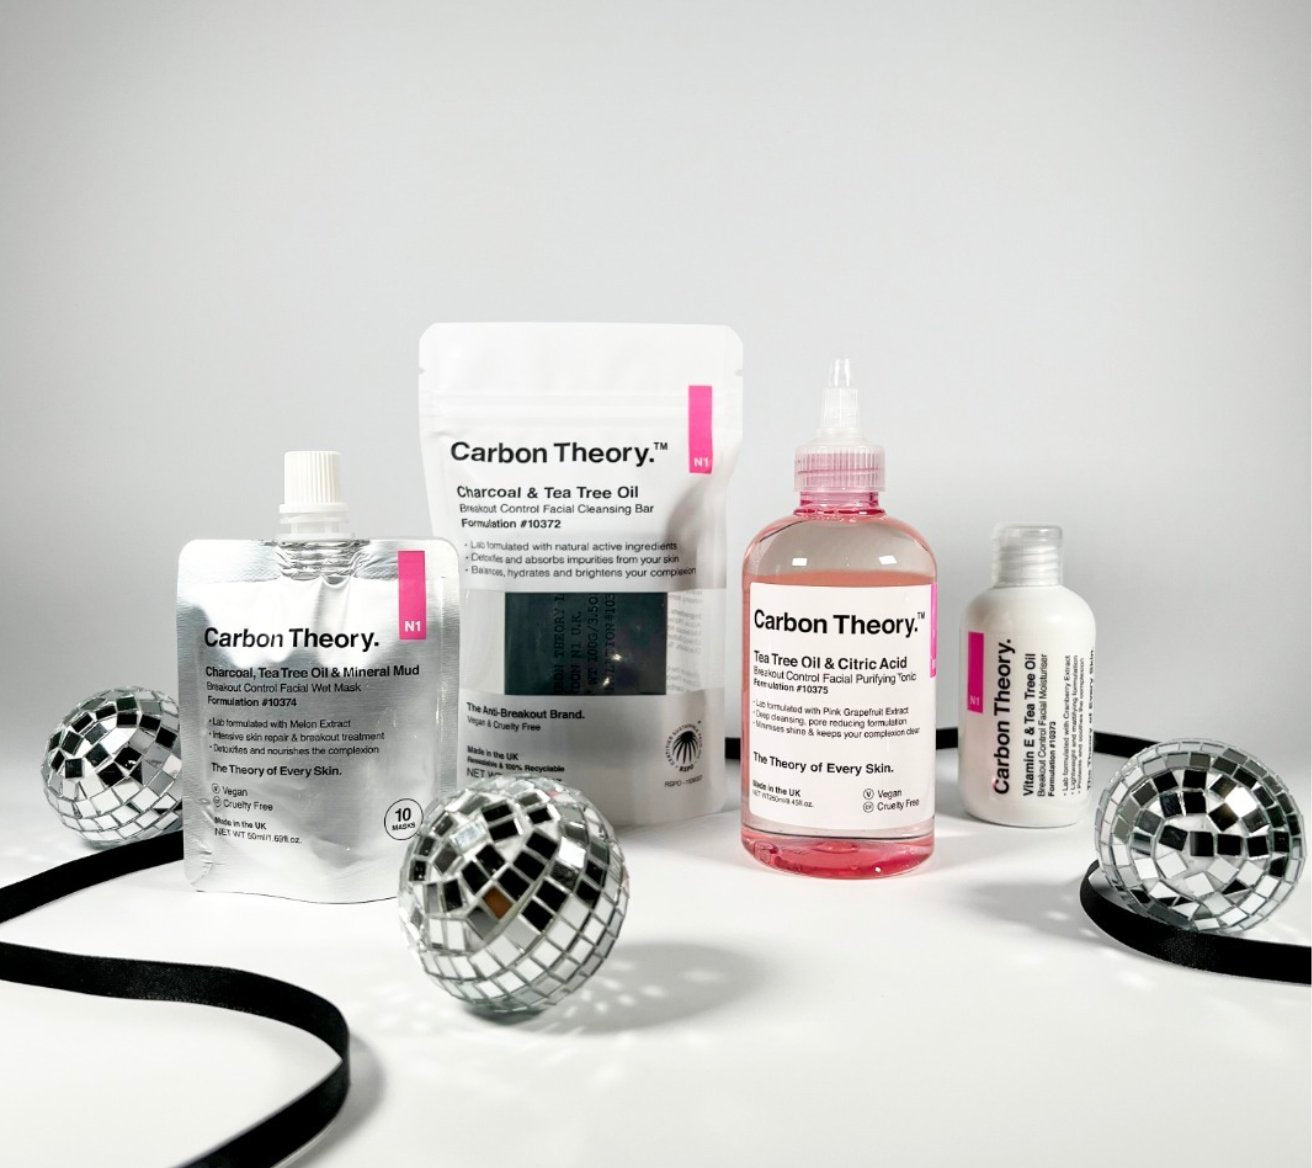 Carbon Theory - 2bcosmetic.com